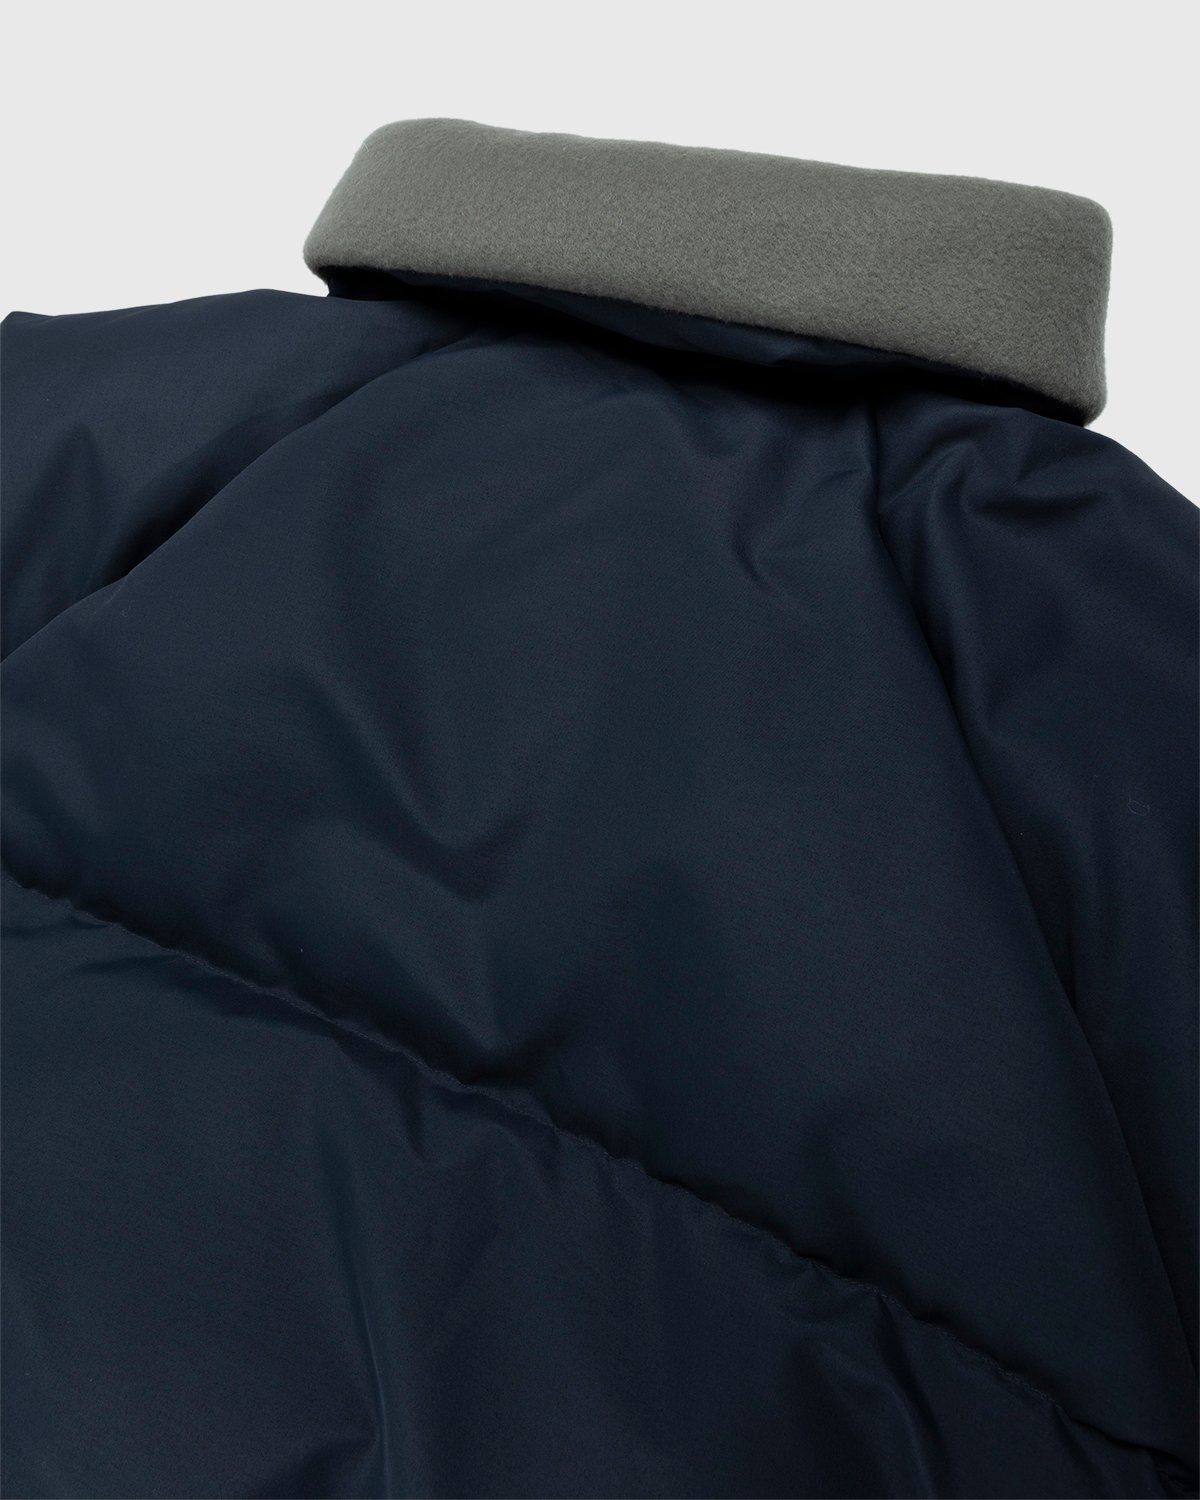 Acne Studios - Down Puffer Jacket Charcoal Grey - Clothing - Grey - Image 9